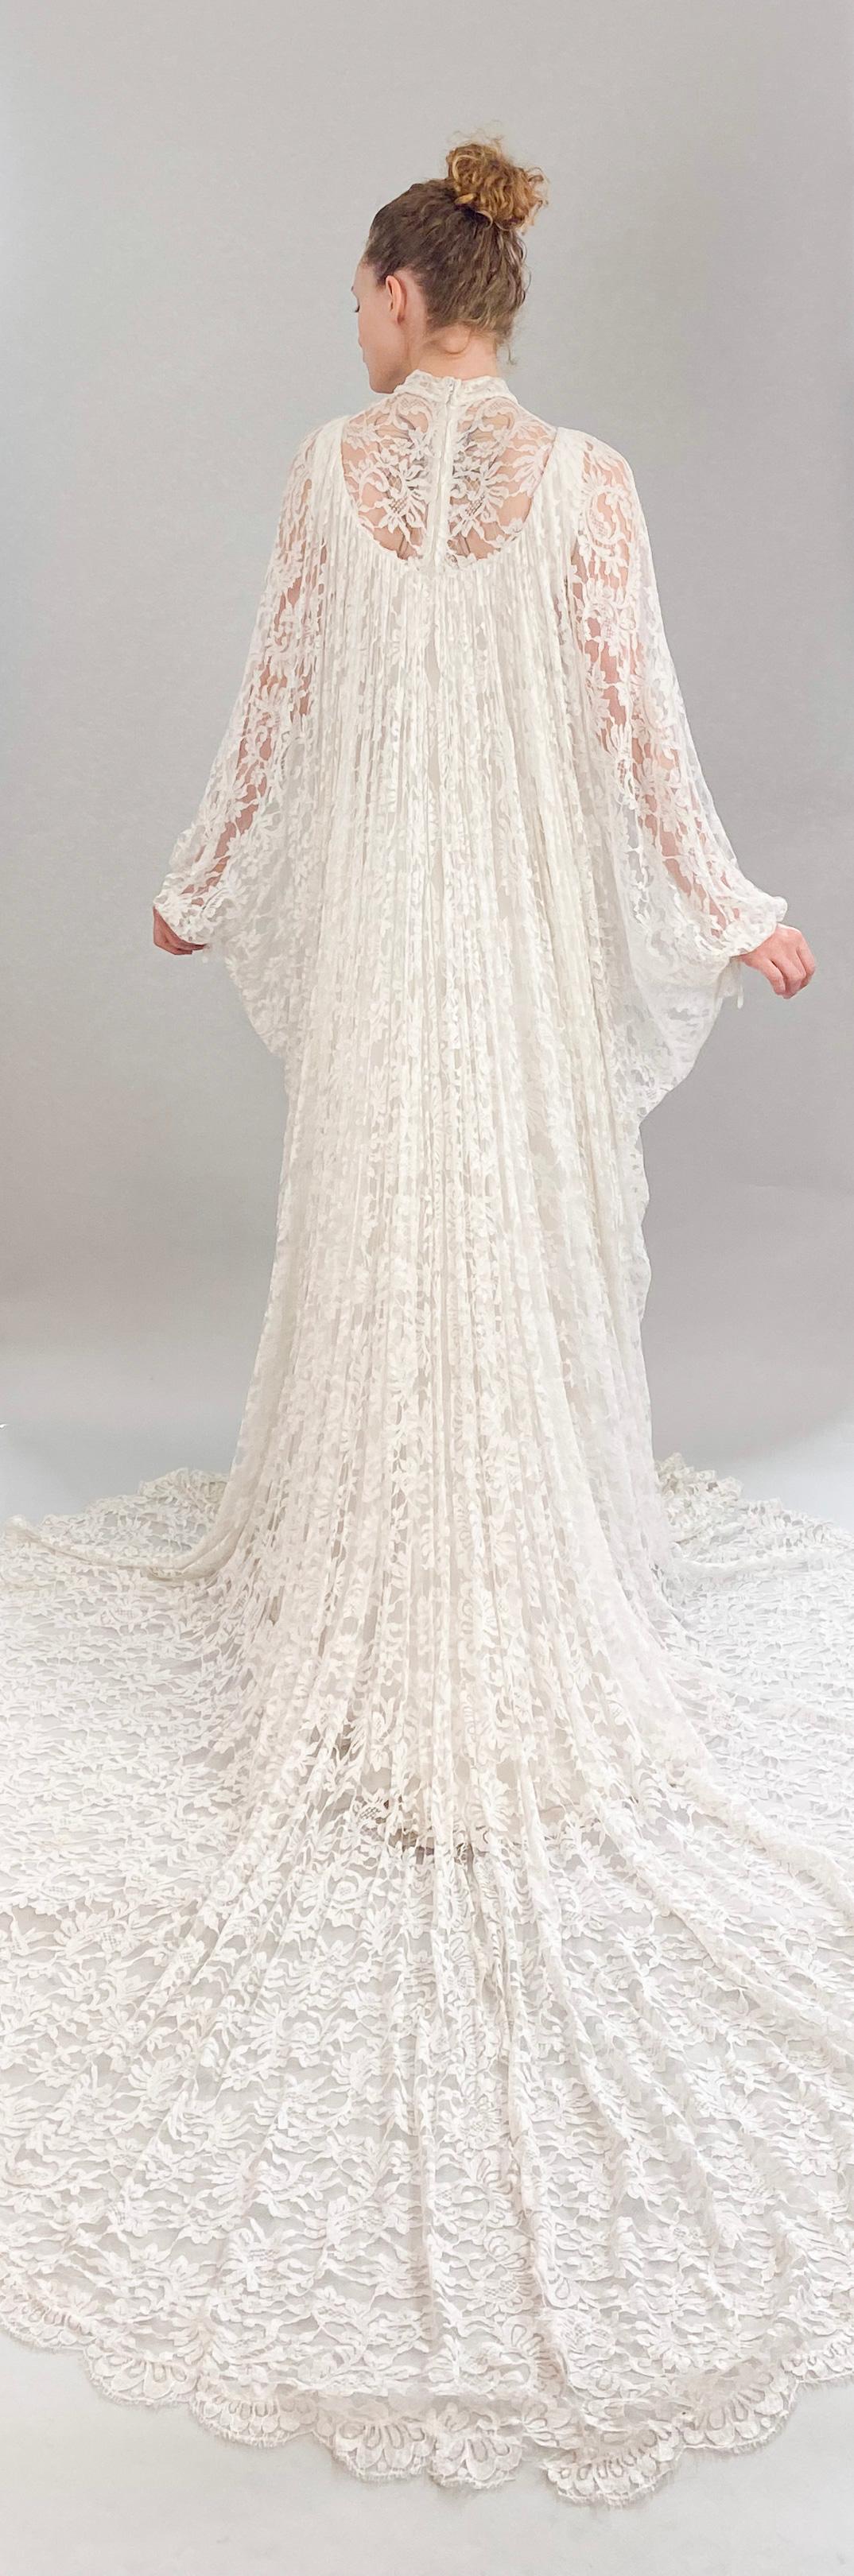 Women's Vintage White Lace Bridal Gown with Batwing Sleeves & Train For Sale